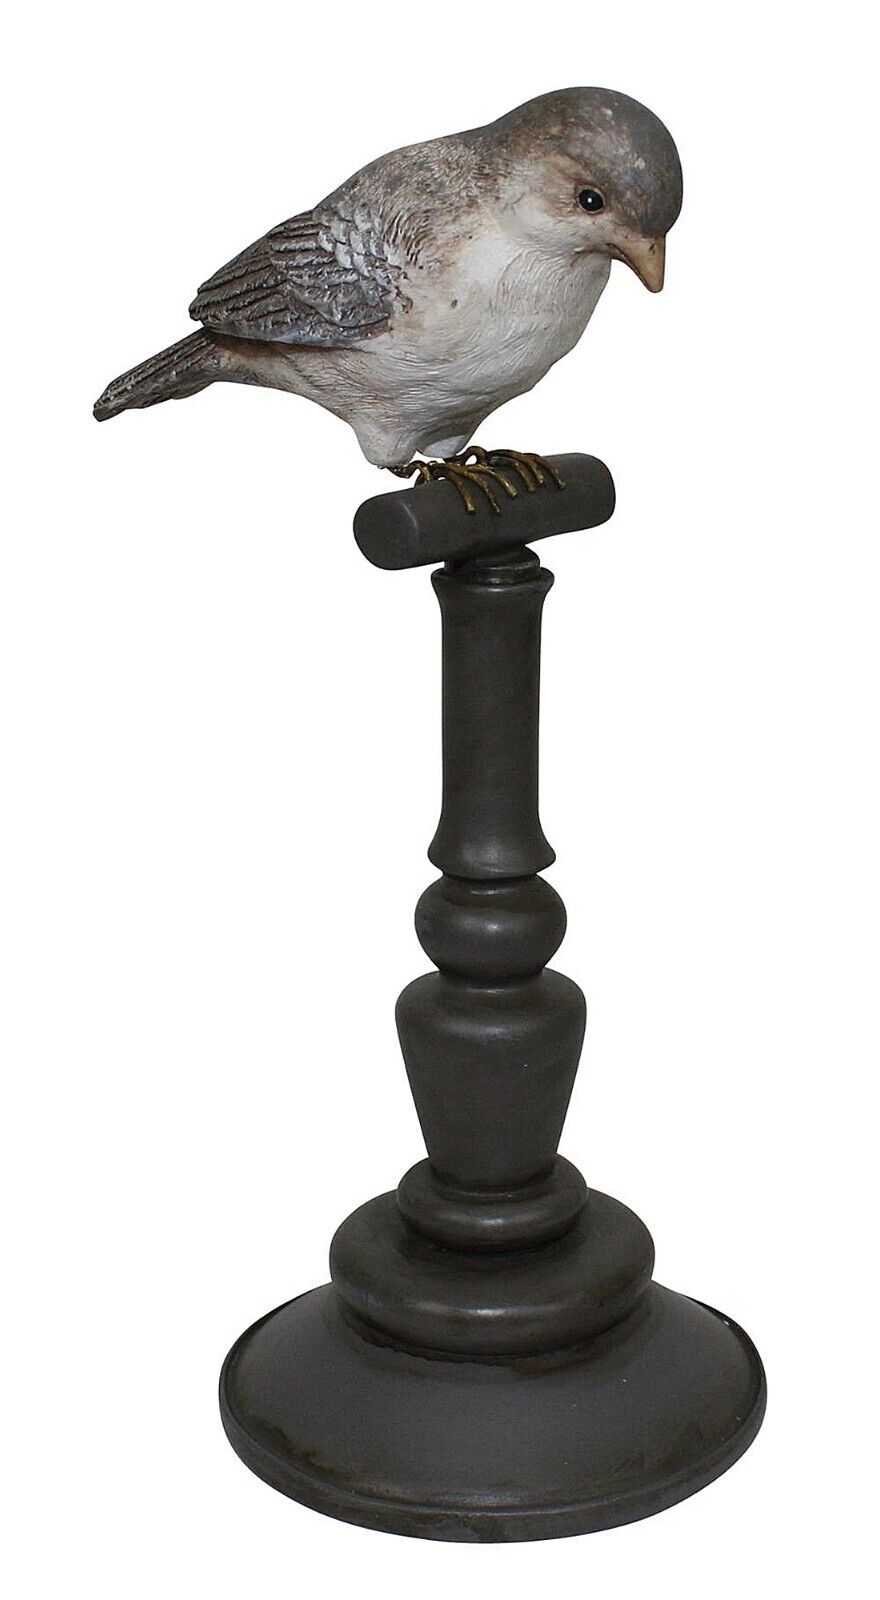 BIRD PERCHED ON STAND FIGURINE